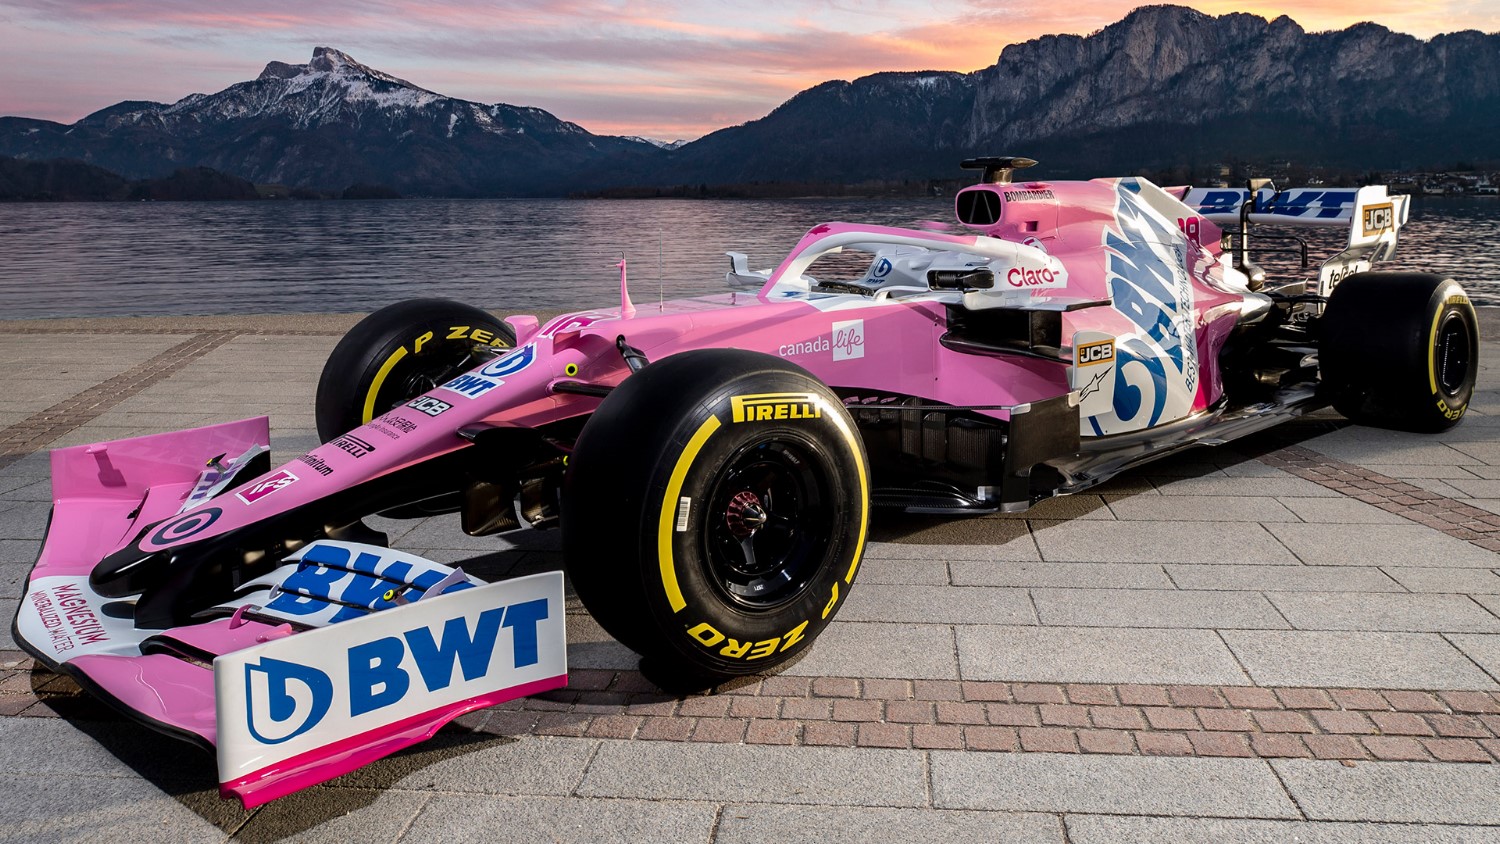 The pink Racing Point Mercedes clone